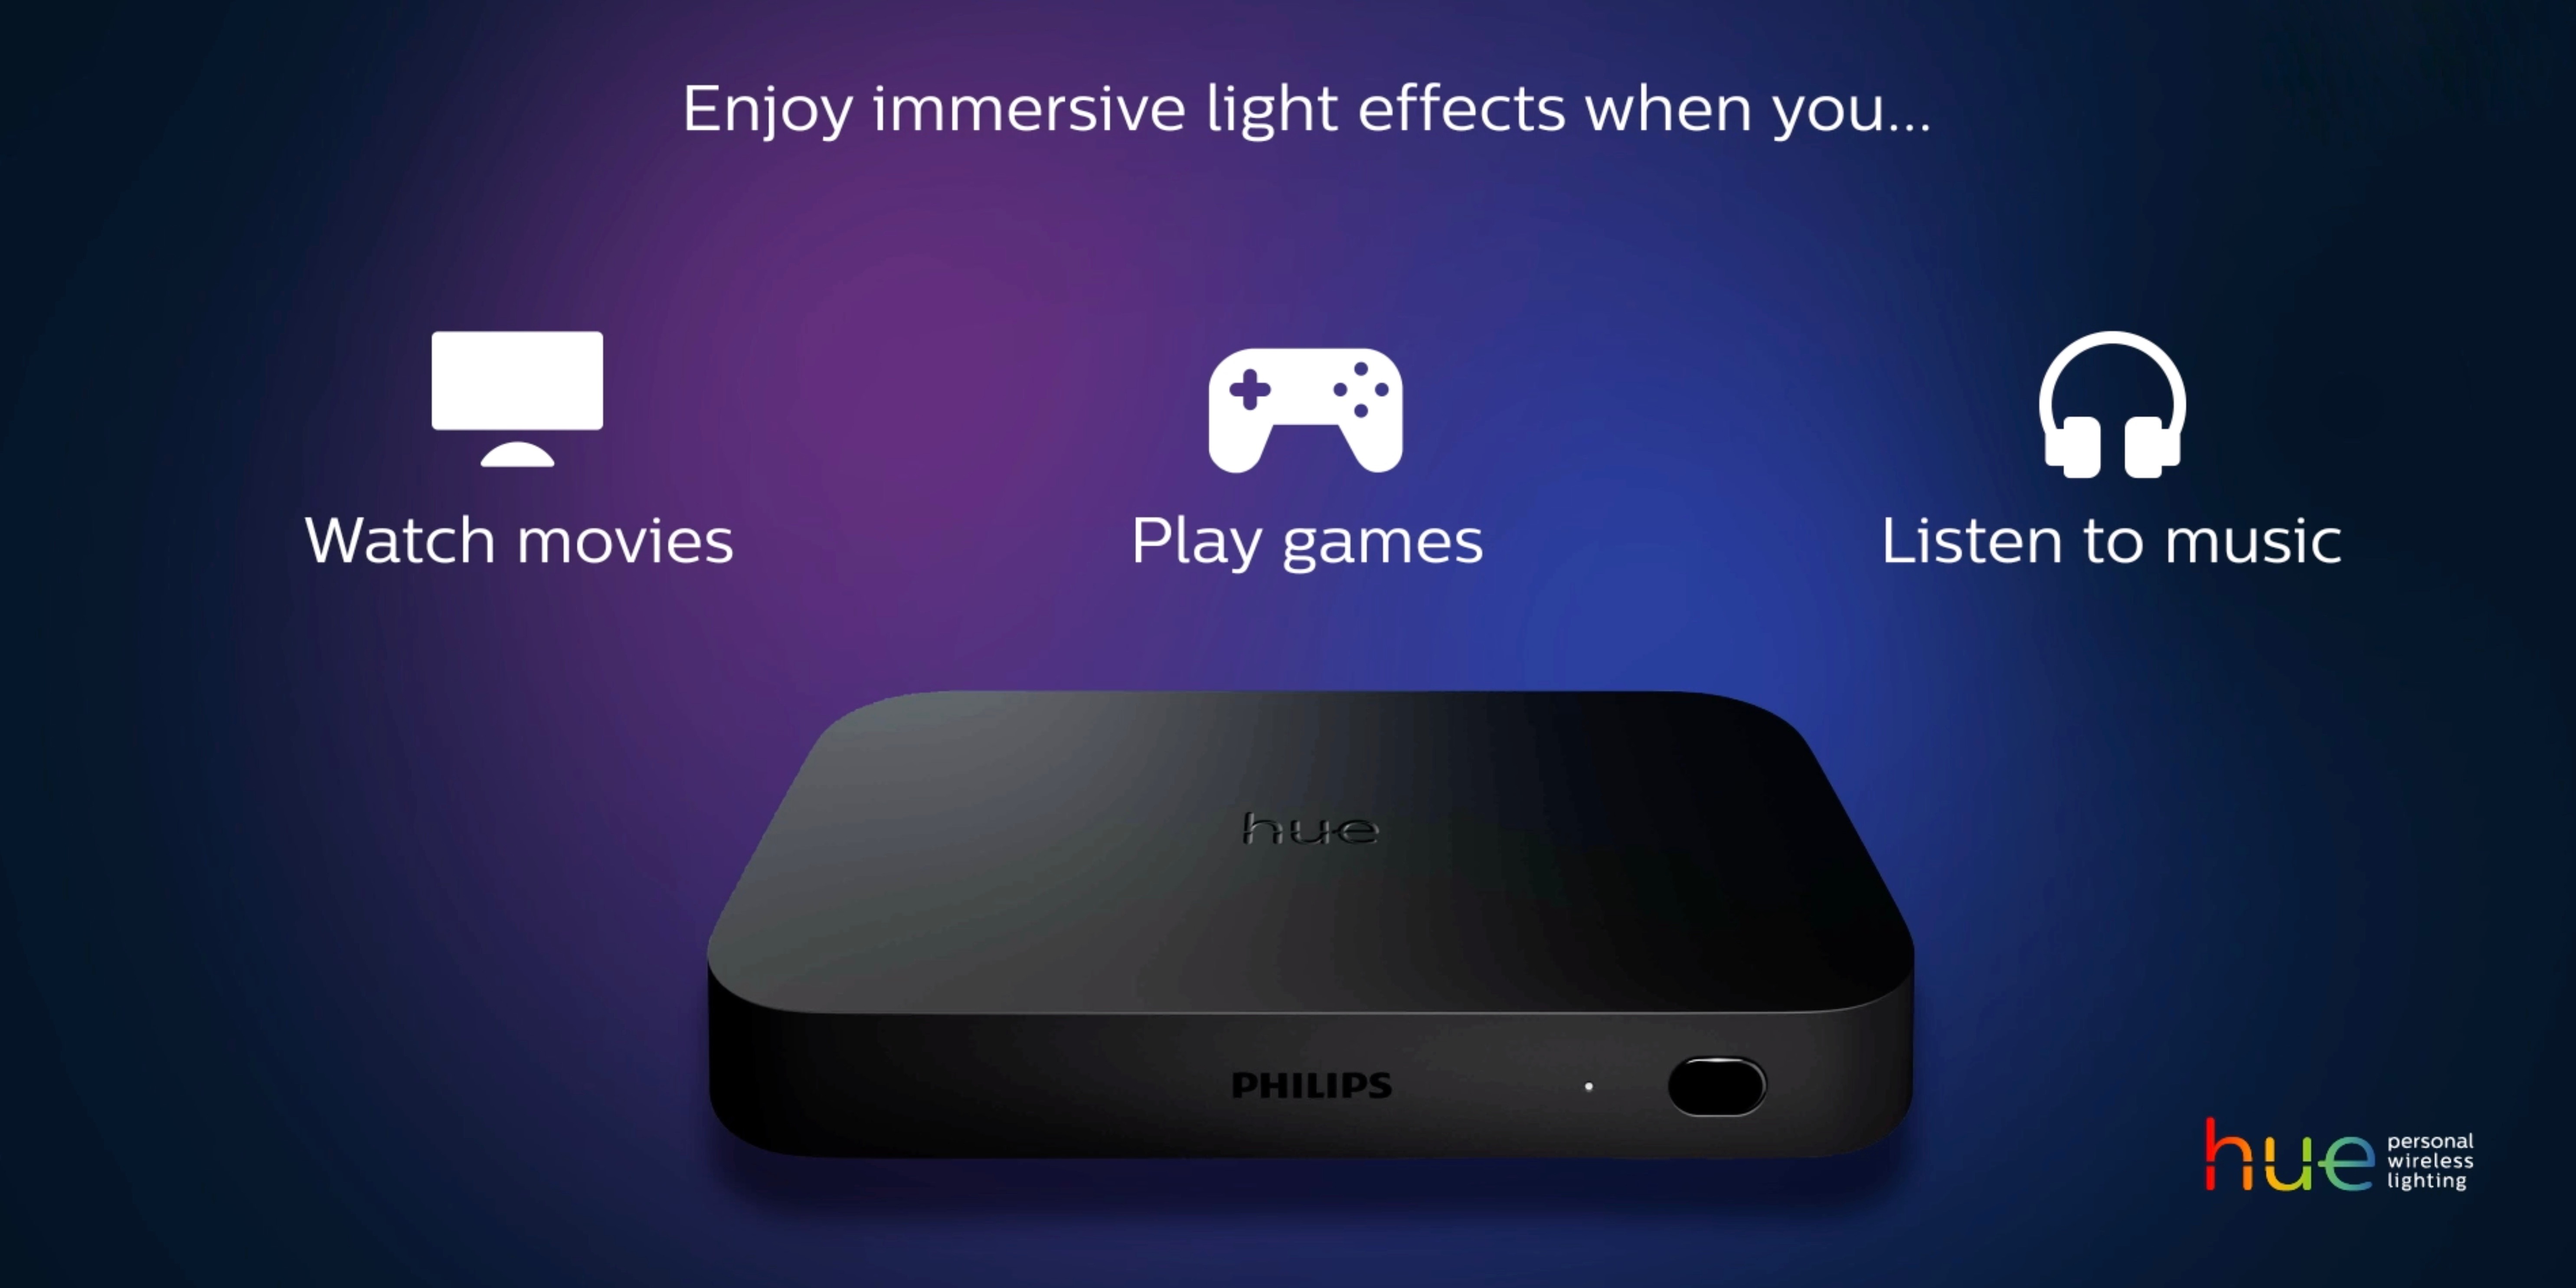 to exile Re-paste Drive away Philips Hue unveils new HDMI TV box that lets smart lights color match what  you watch - 9to5Mac